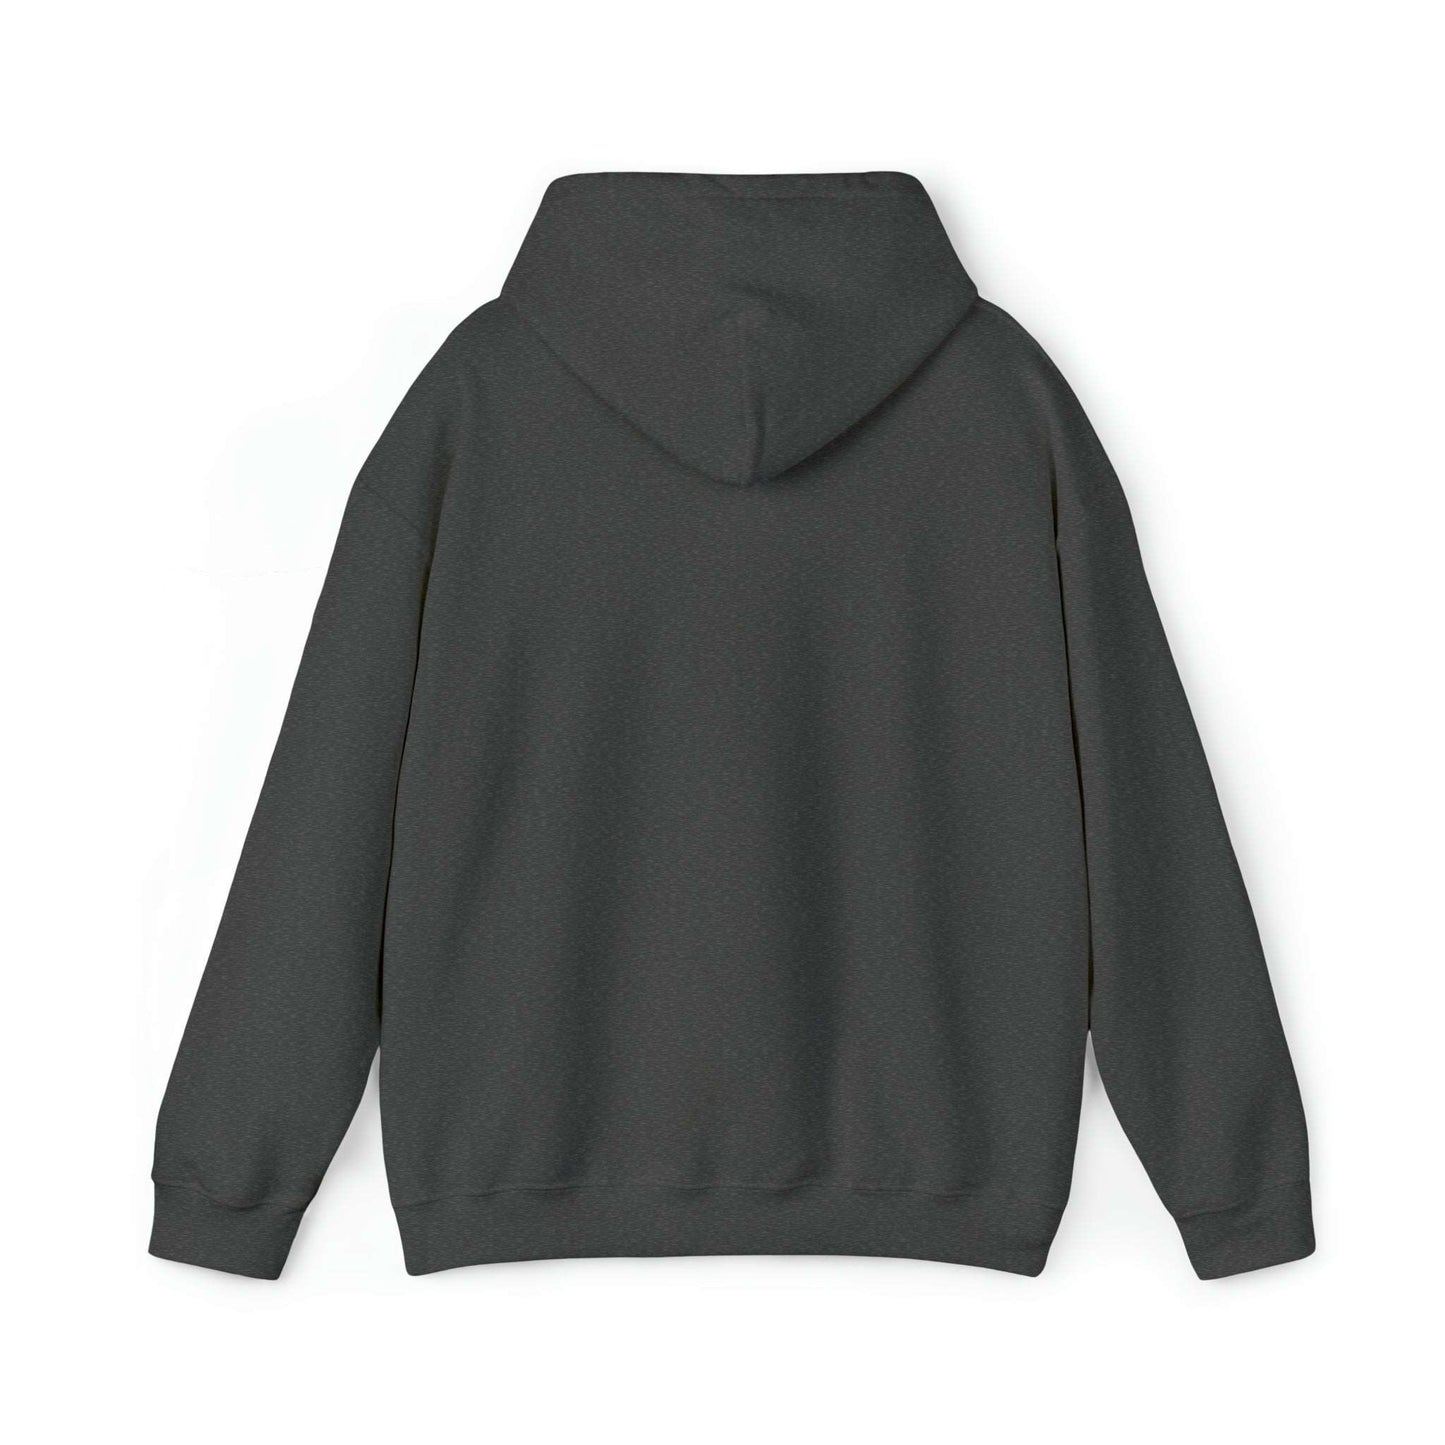   Chill Hoodie from HoodySZN.com